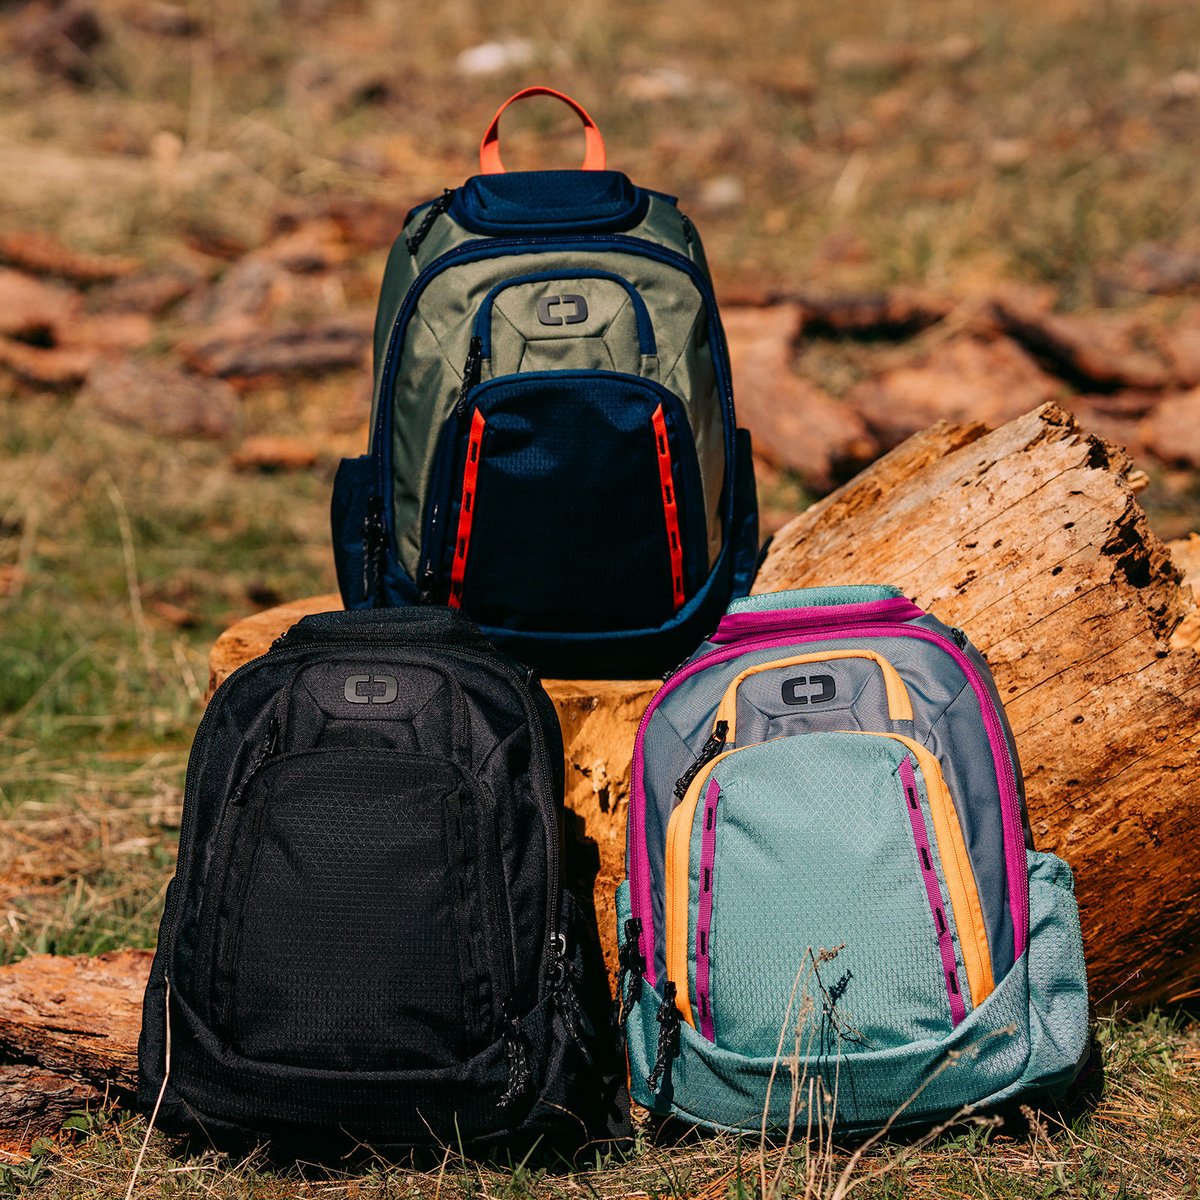 Built For Generations. ​ Our best-selling backpack is back 🔥 but this time in a whole new size. ​ Meet the Renegade Pro's mini version, the all-new #OGIORenegade Rustler.